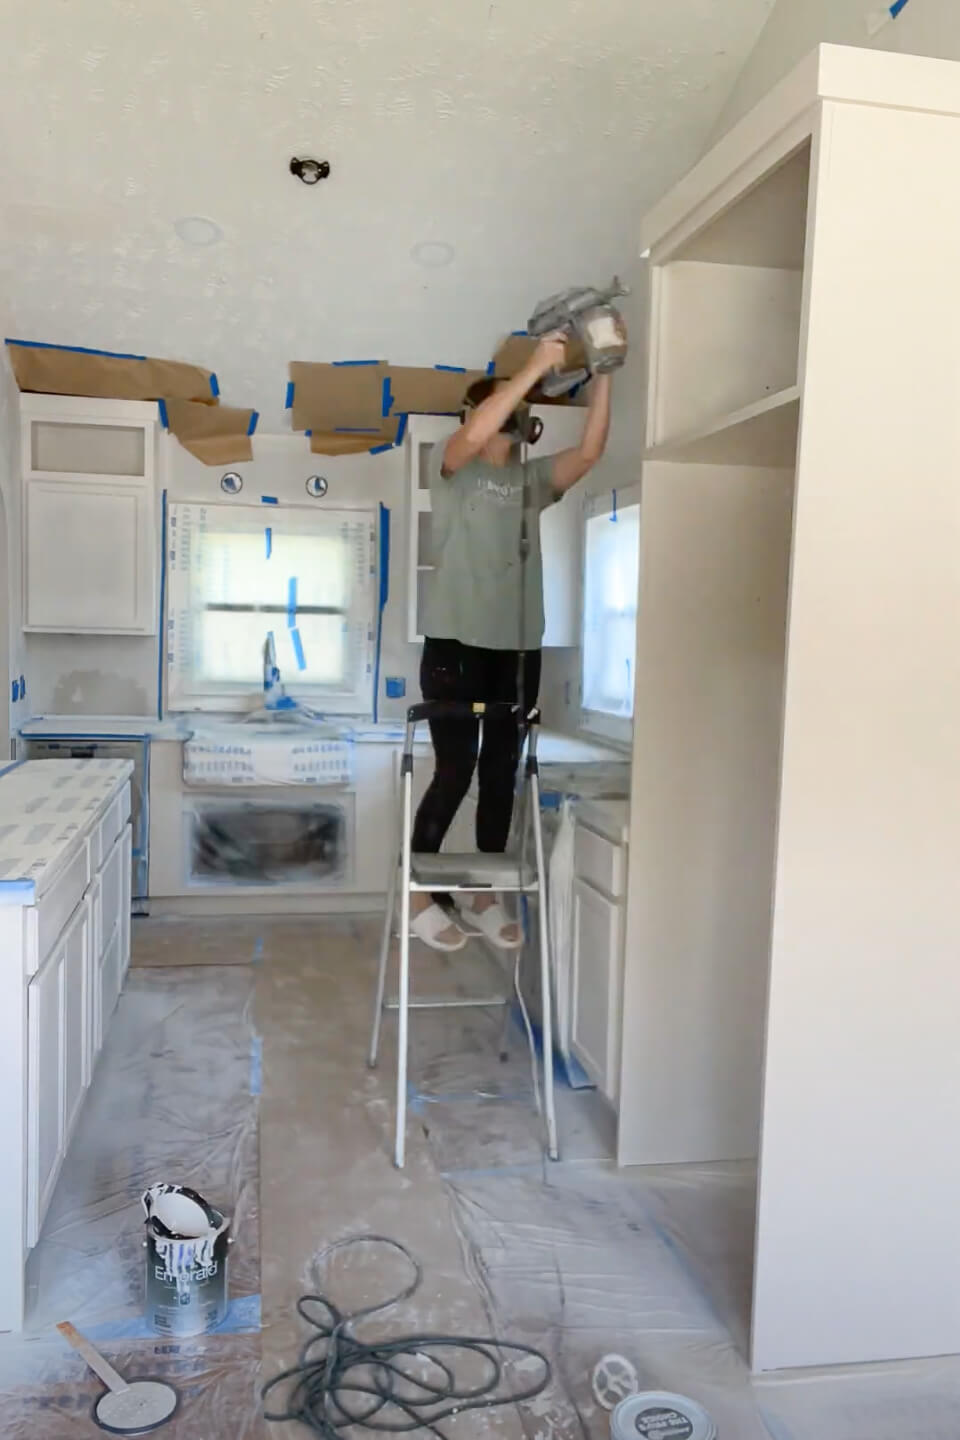 Woman using paint sprayer to paint her kitchen cabinets.